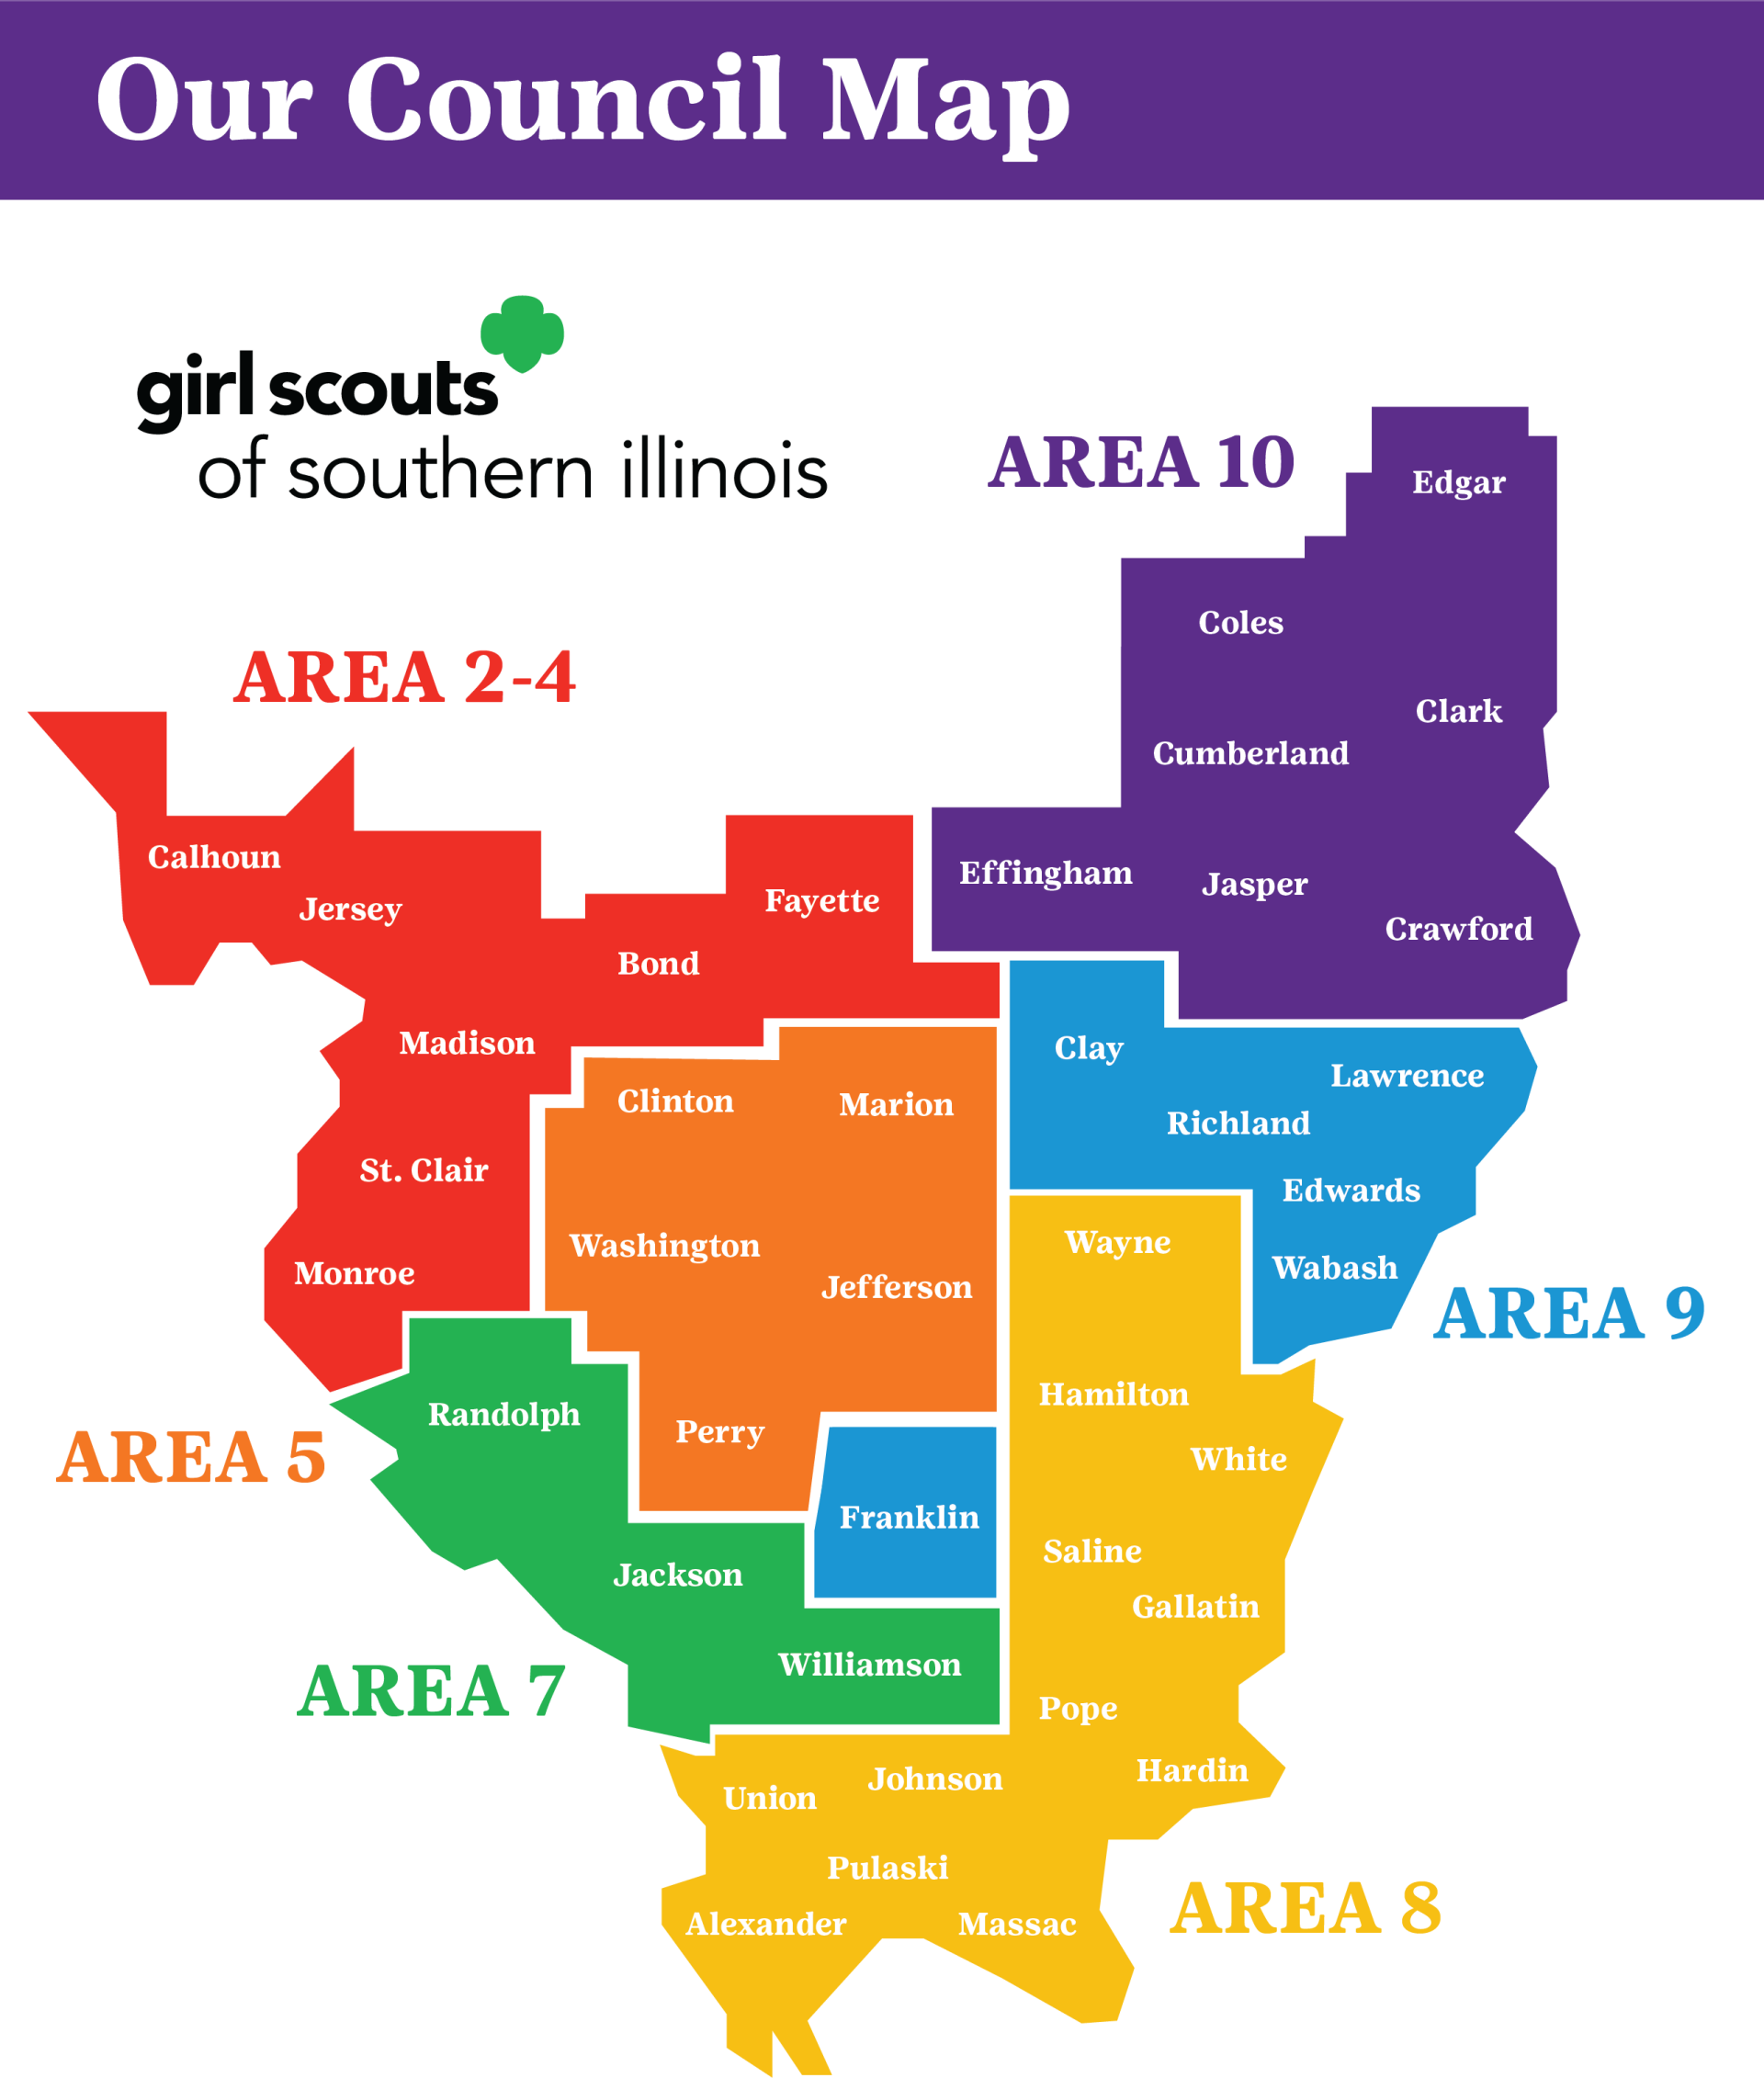 gsofsi council map organized by area